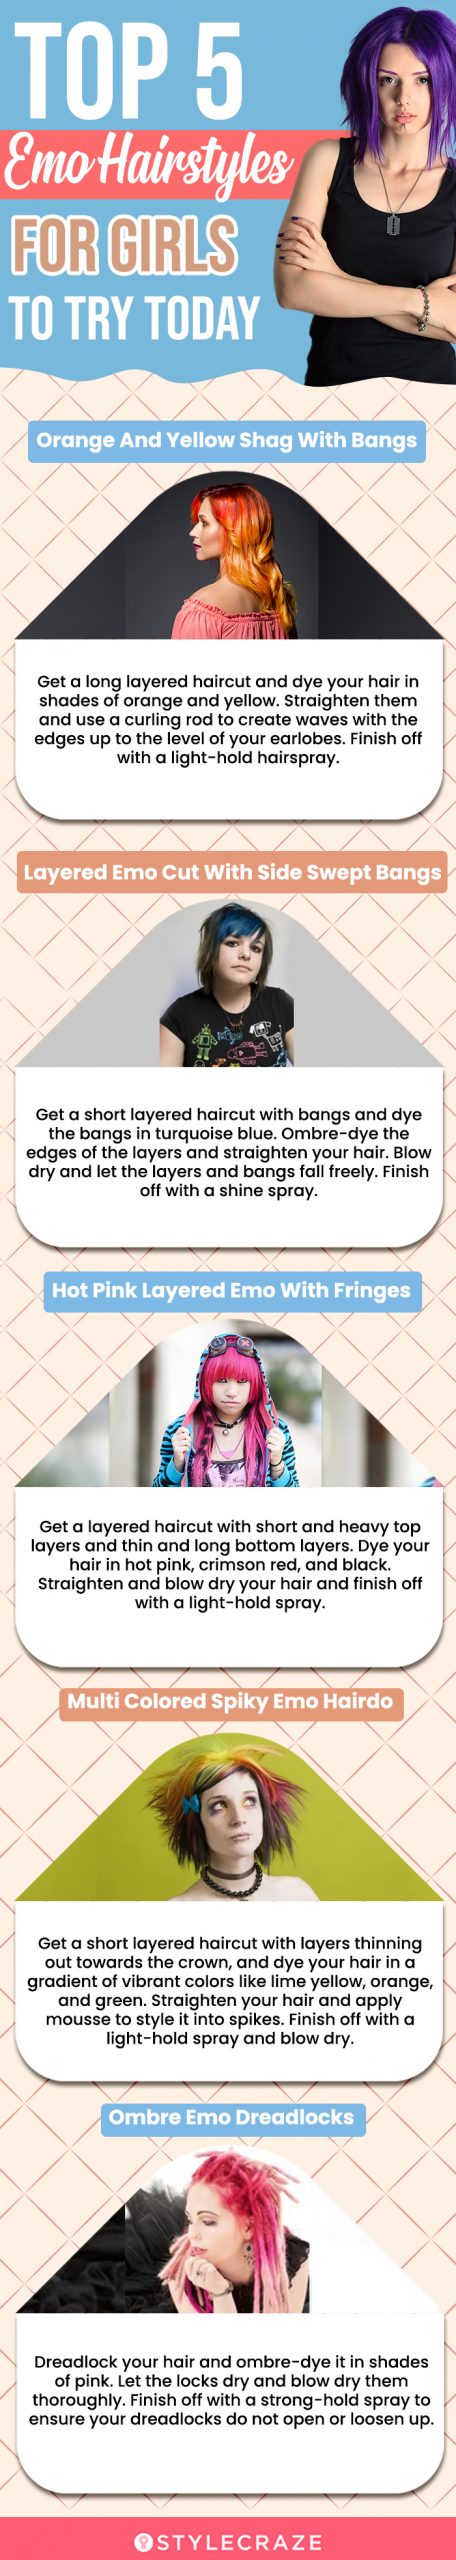 top 5 emo hairstyles for girls to try today (infographic)